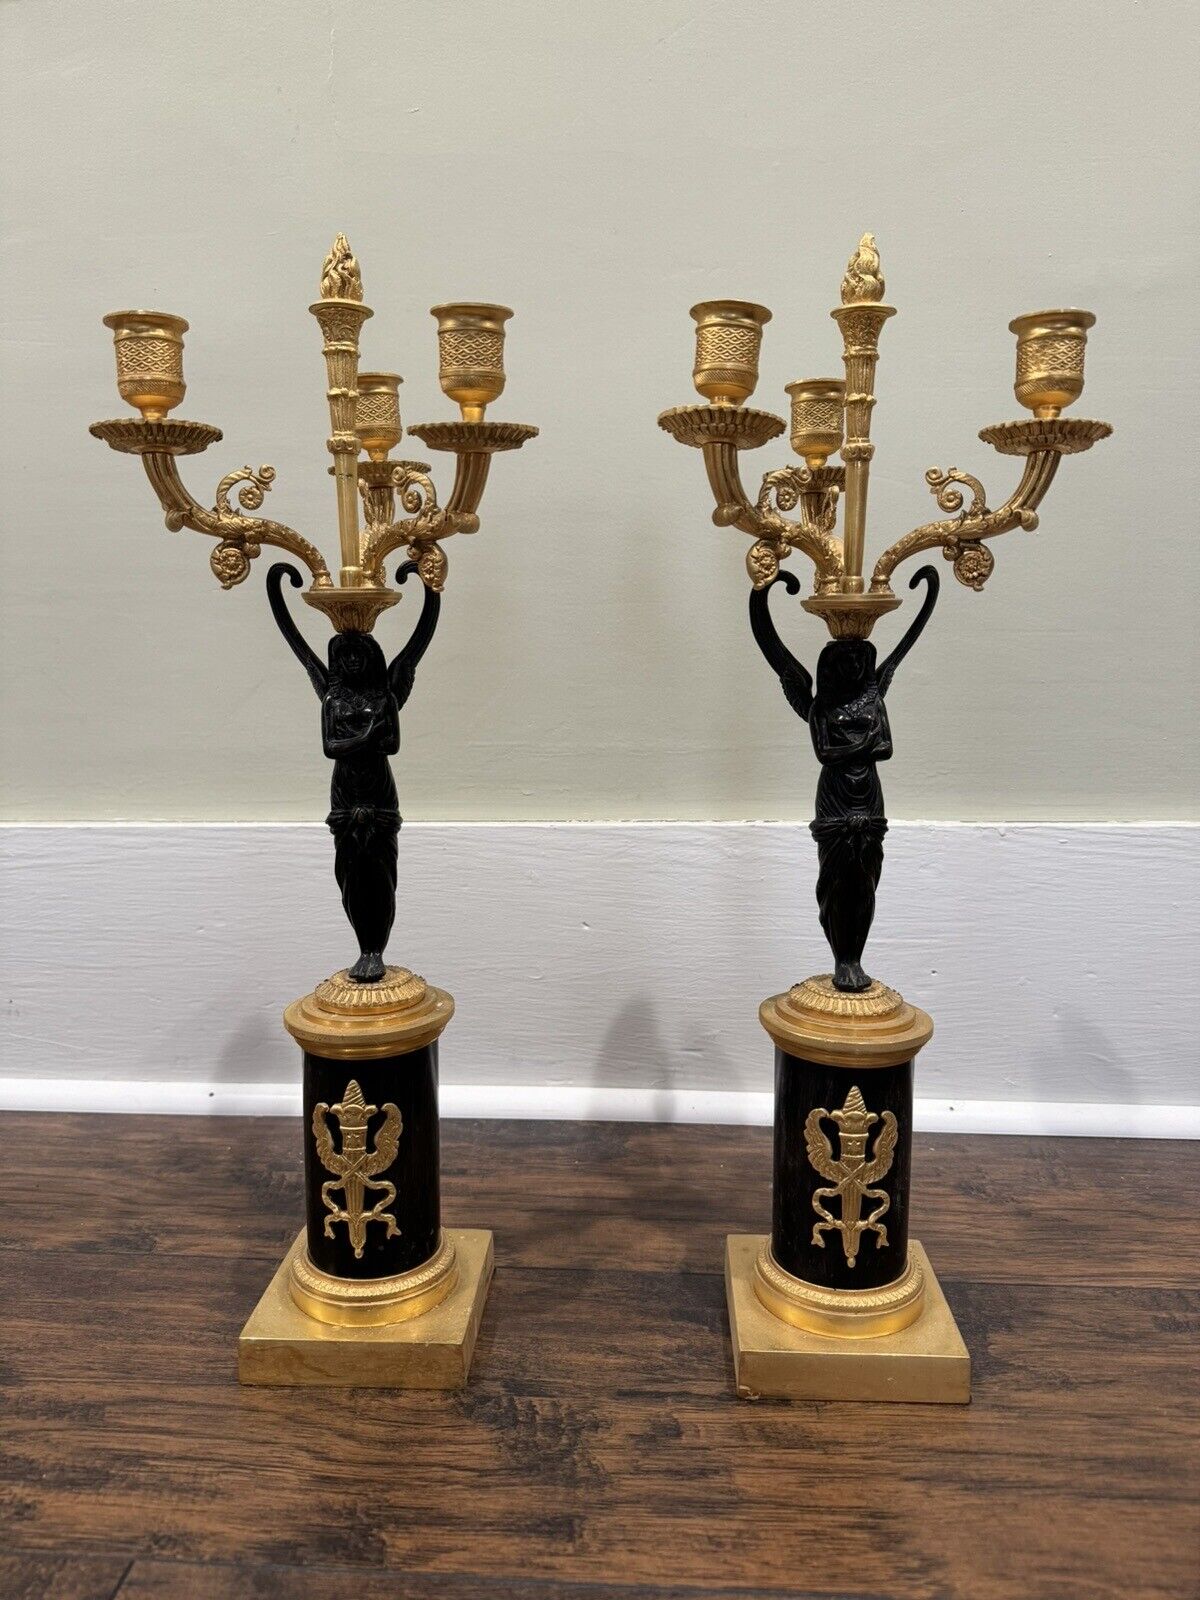 Pair of French Empire Gilt Bronze and Ormalu Candelabras